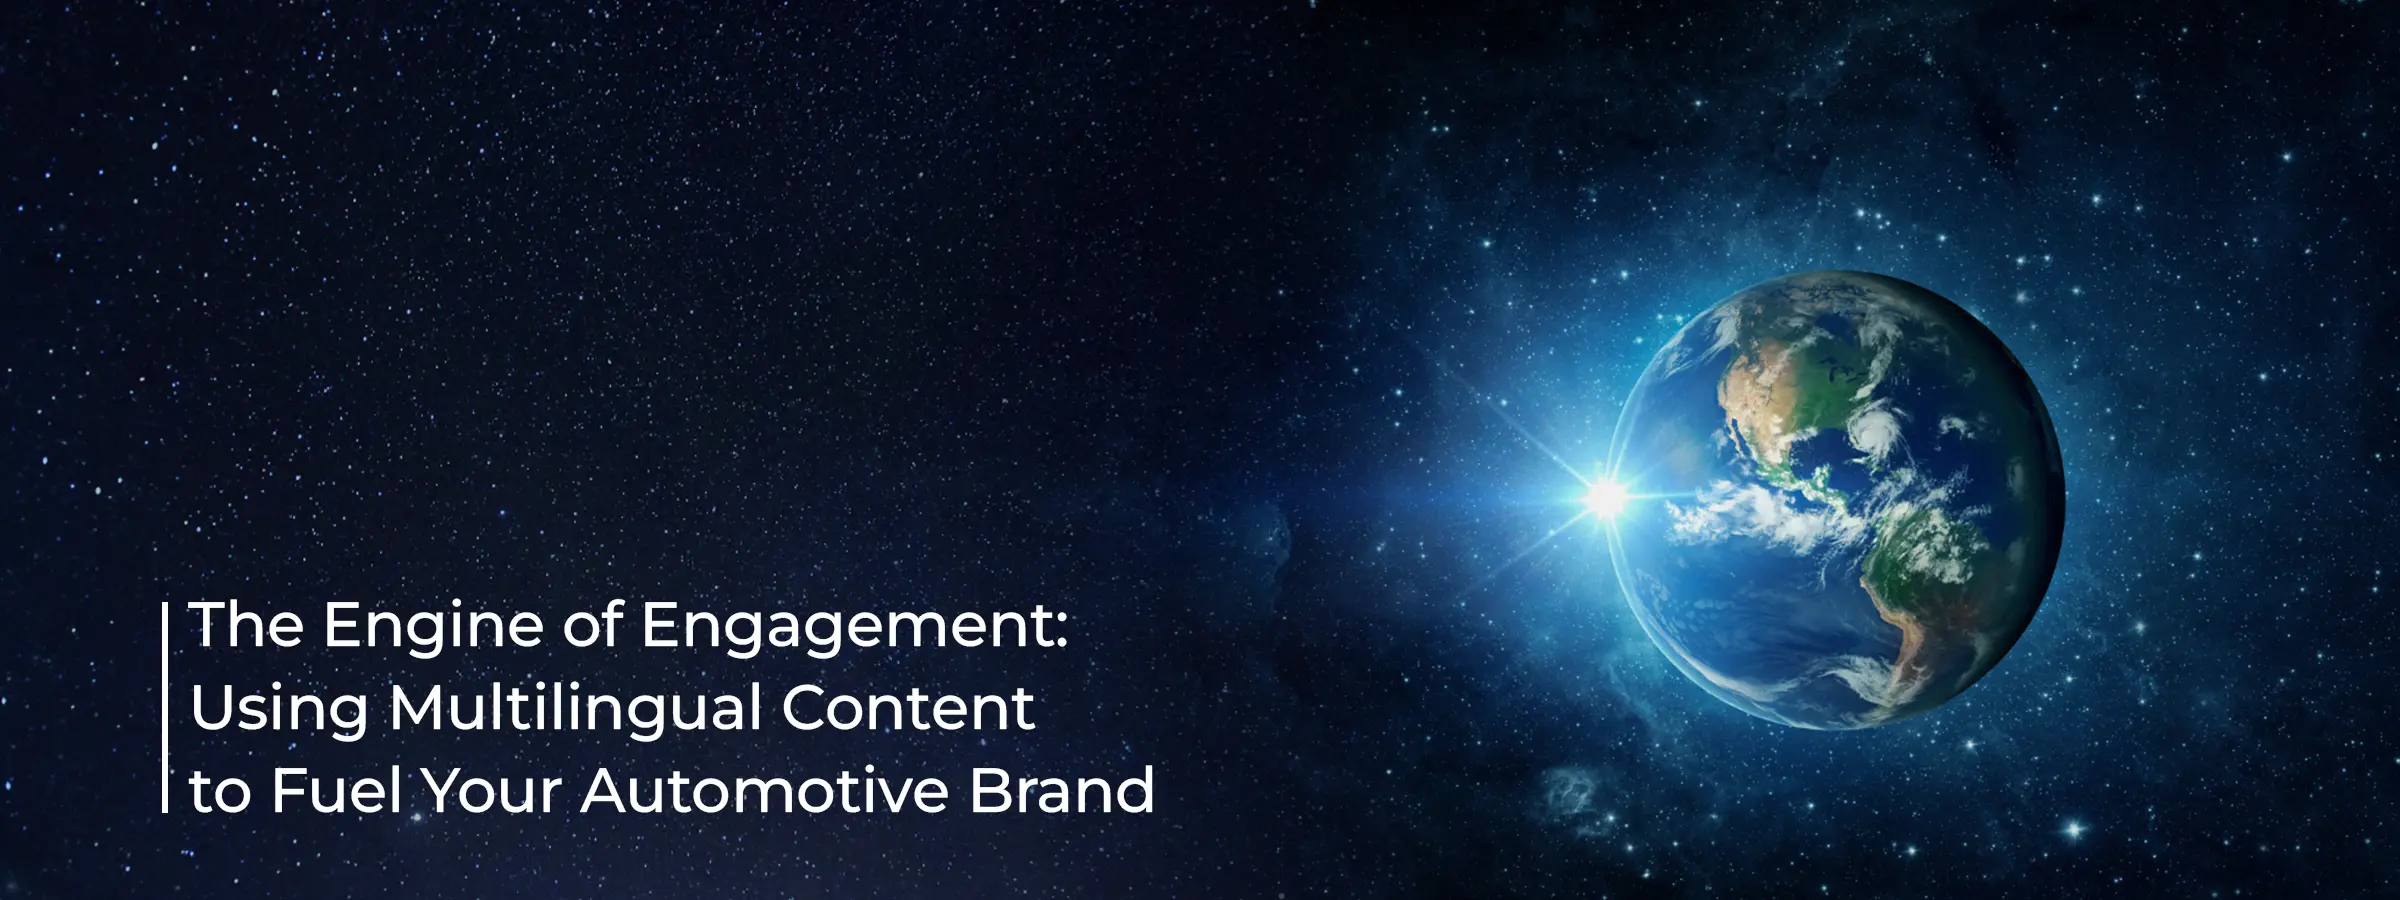 multilingual-content-to-fuel-your-automotive-brand